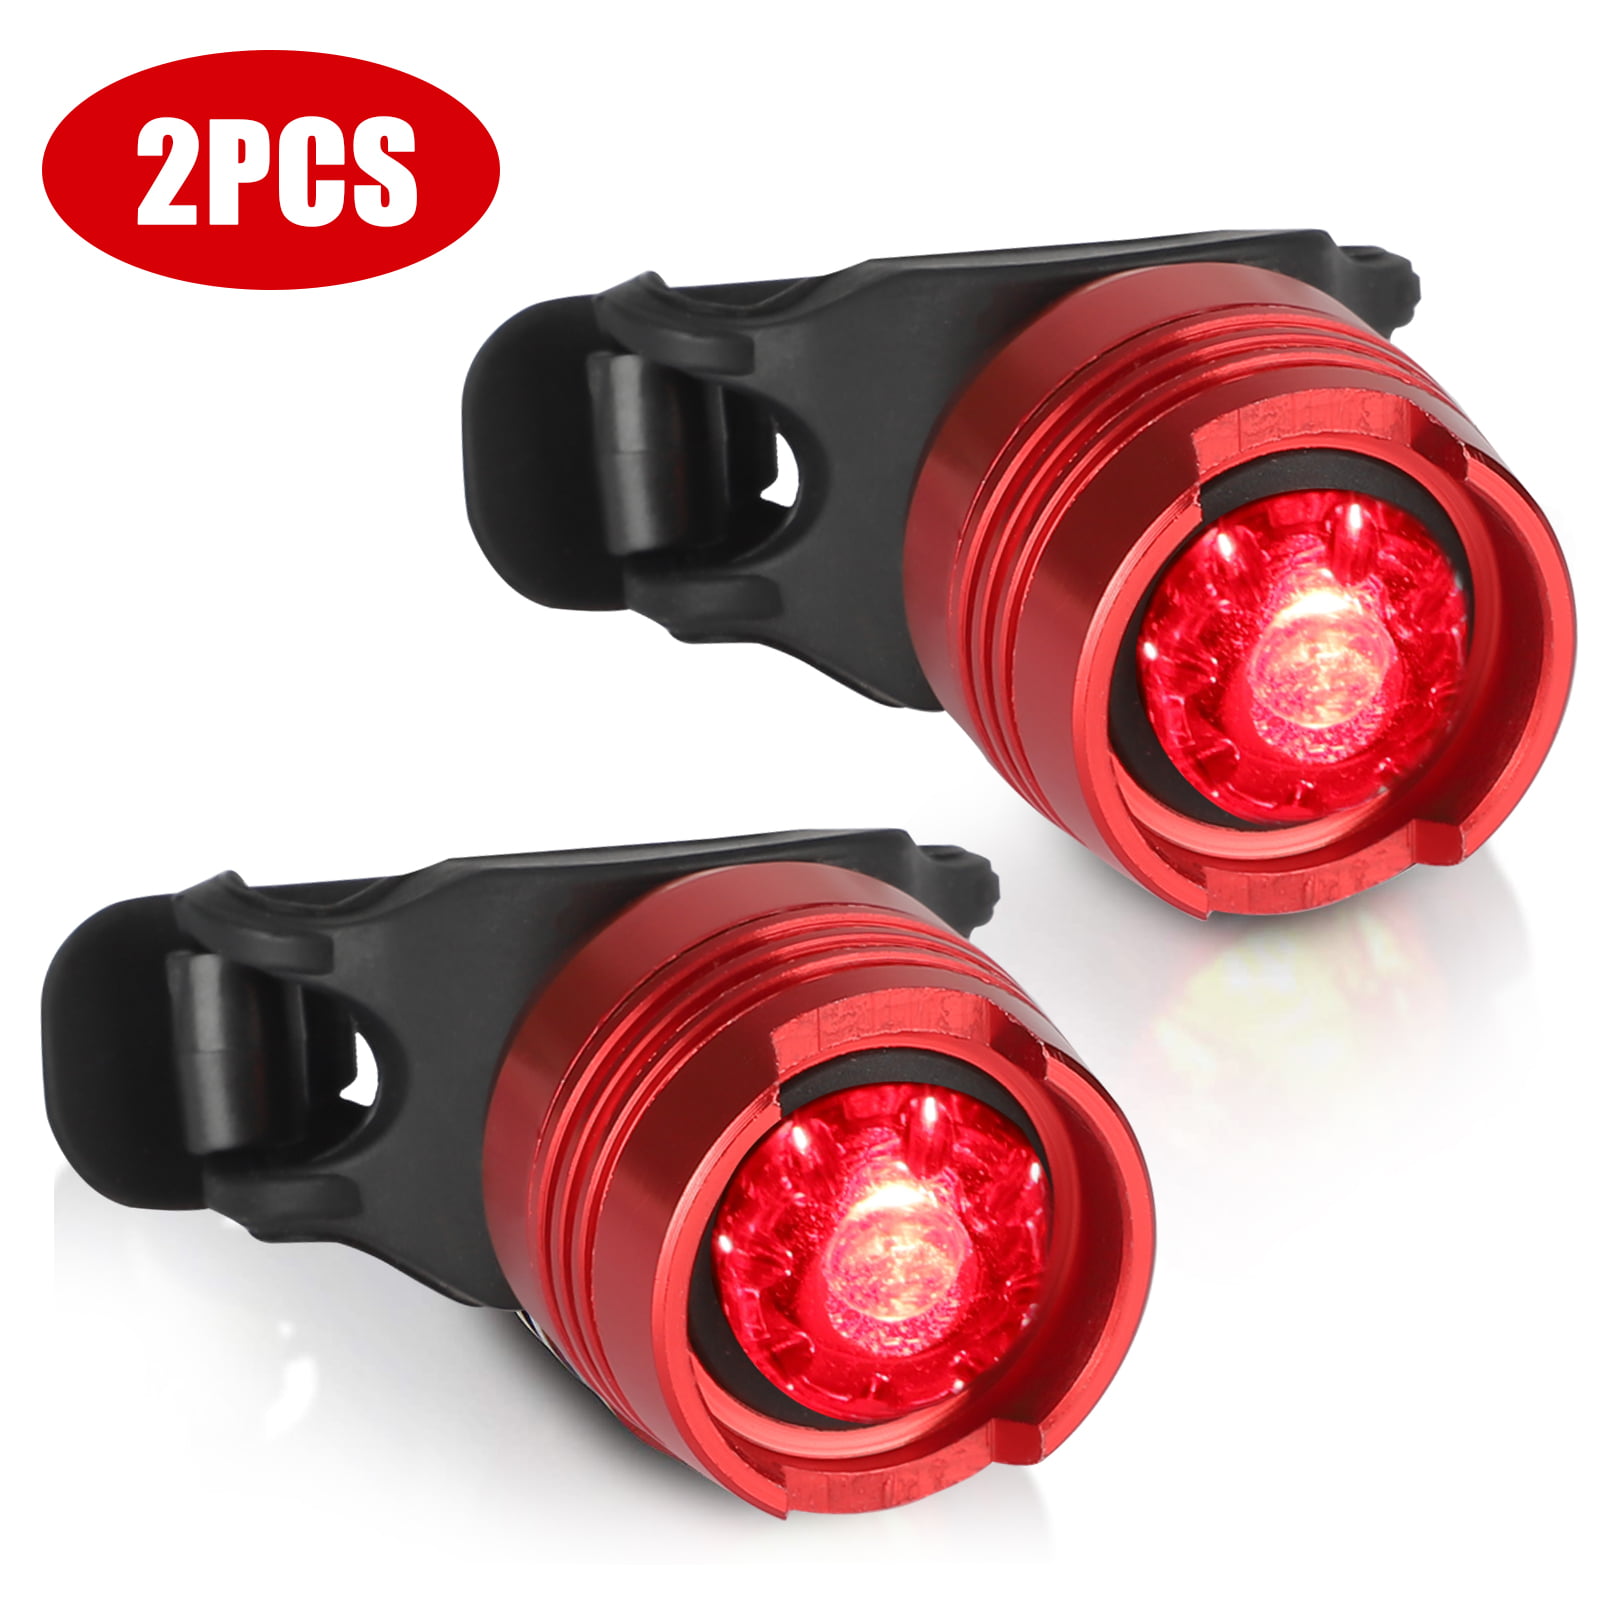 Led Bicycle Bike Cycling Rear Tail Safety Flash Light Warning Lamp Safety Easy